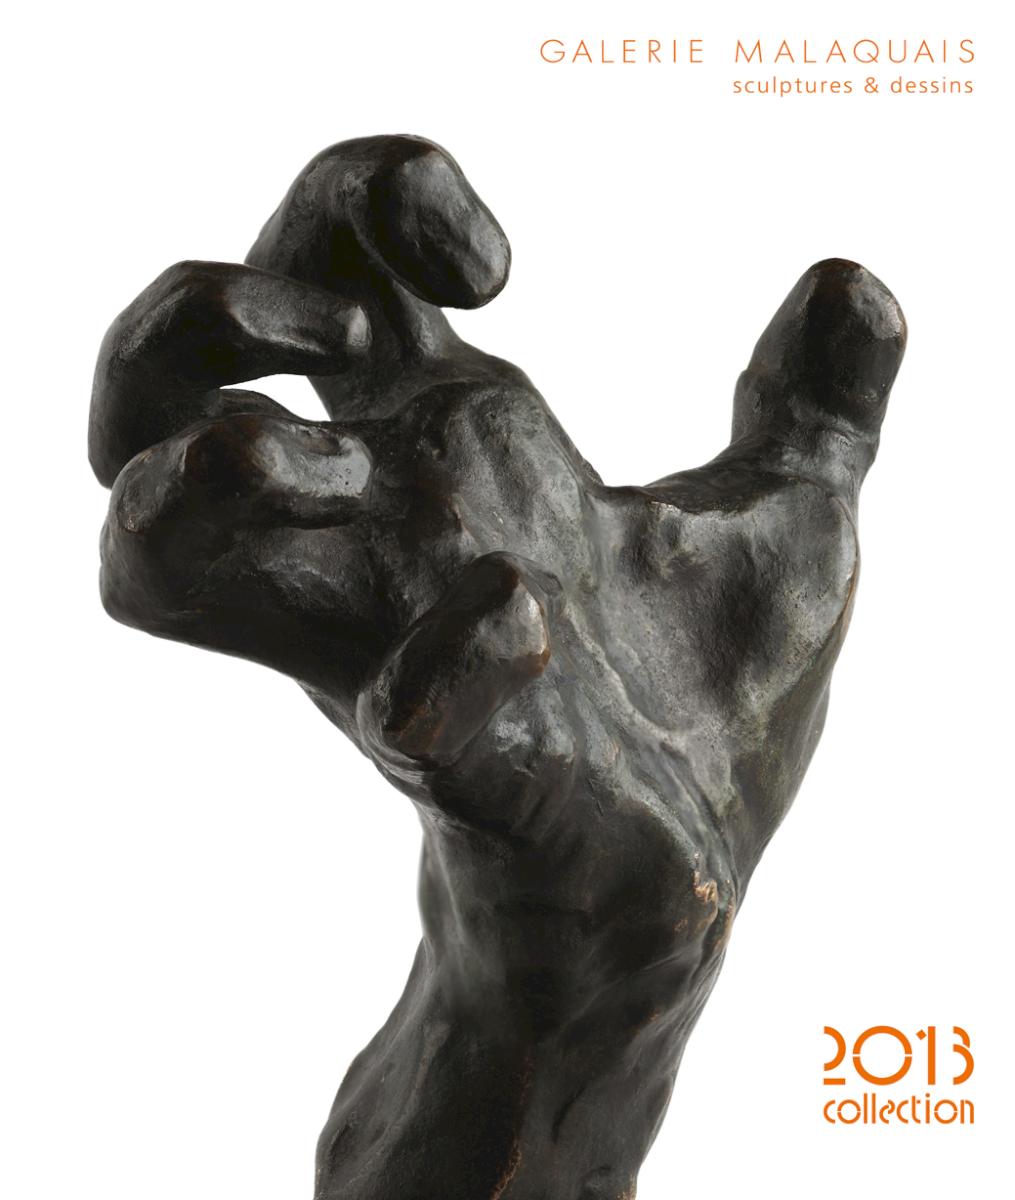 Galerie Malaquais, sculptures & drawings : 2013 Collection